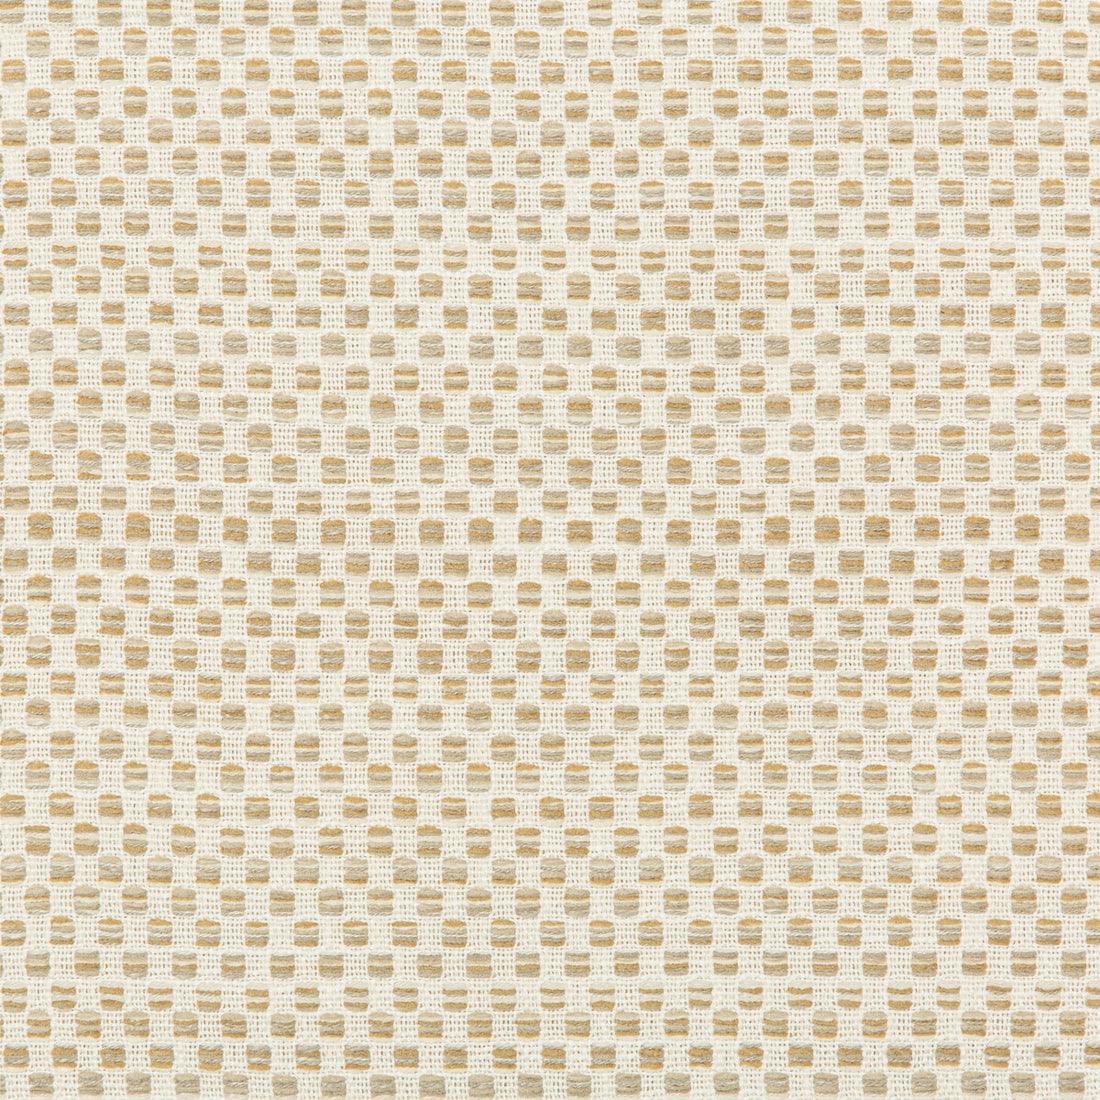 Kravet Design fabric in 36090-16 color - pattern 36090.16.0 - by Kravet Design in the Inside Out Performance Fabrics collection